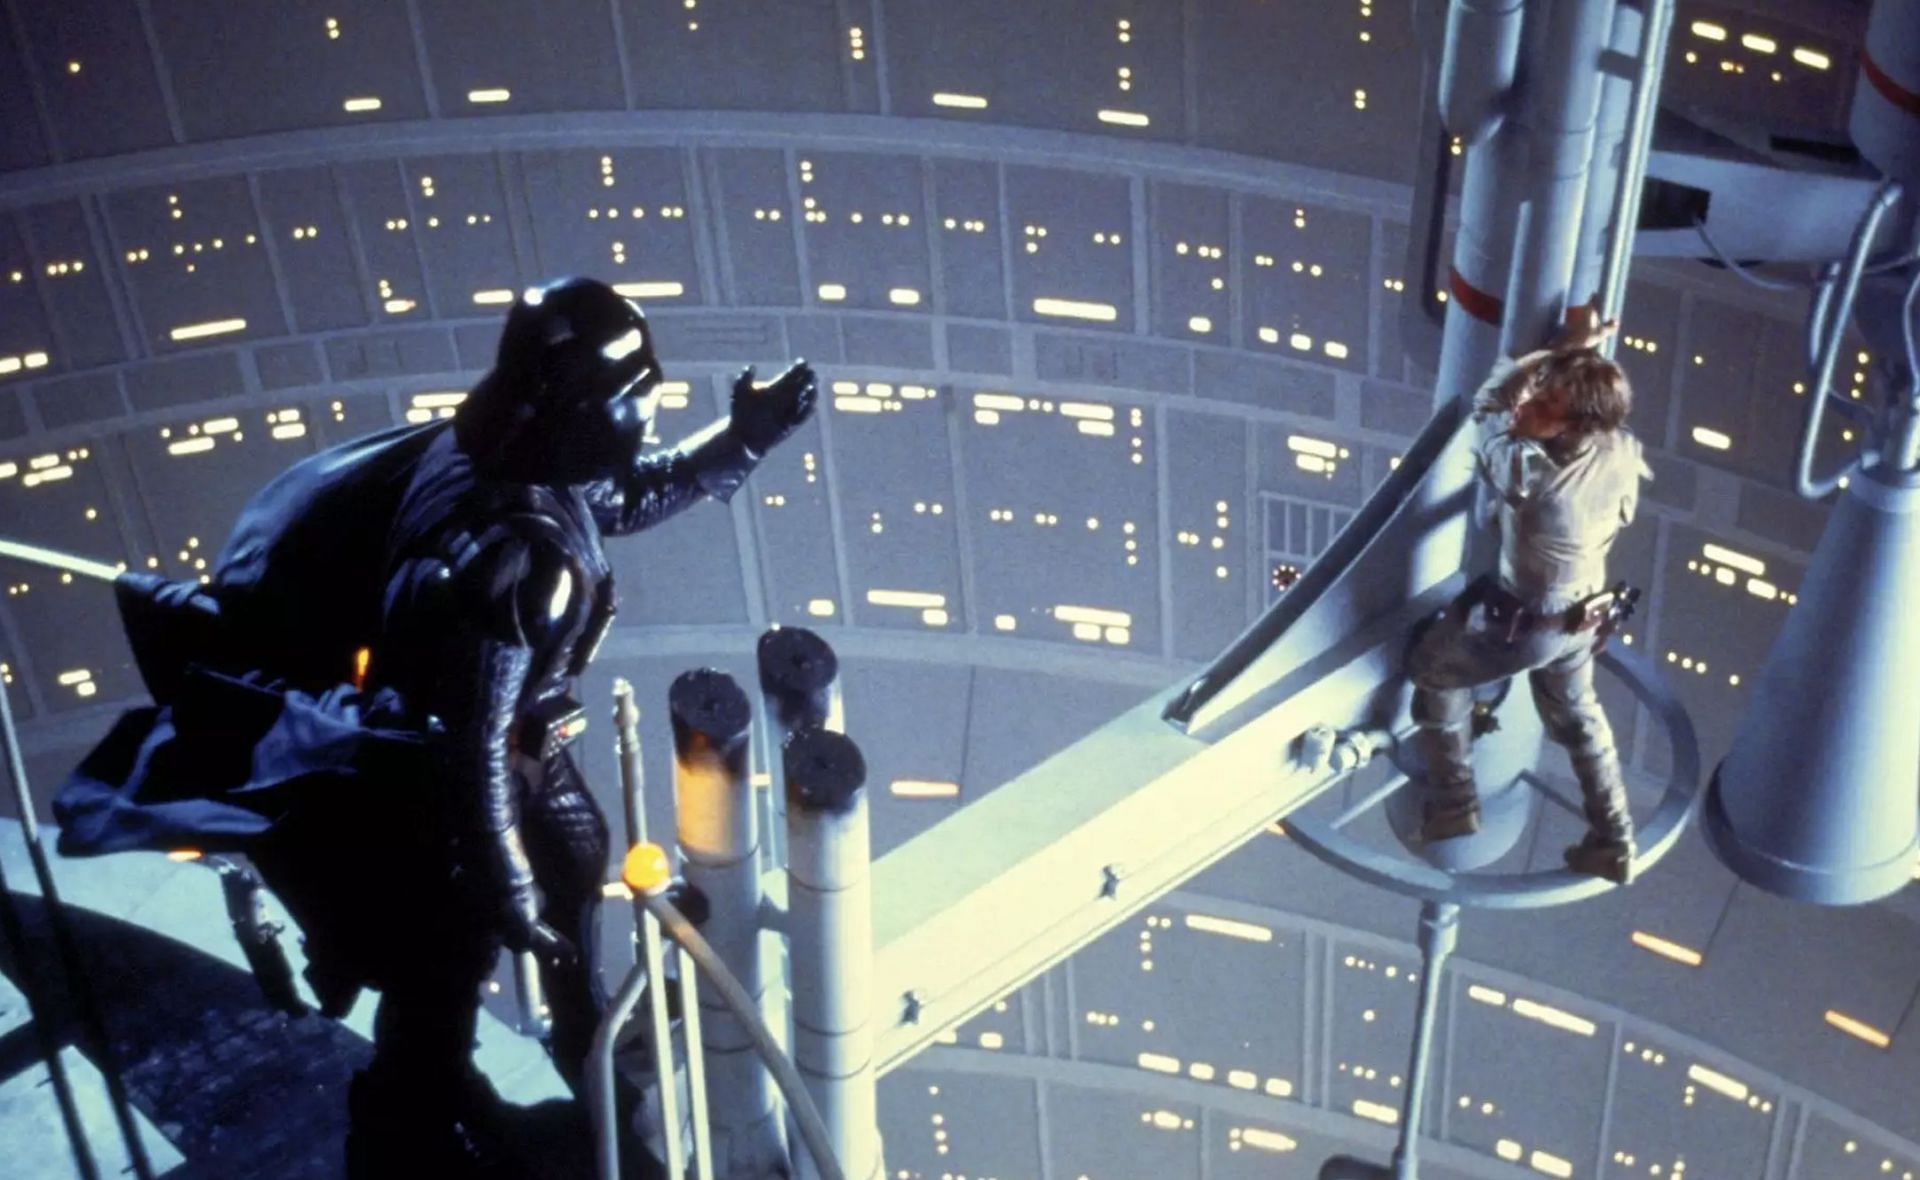 Luke Skywalker engages in a lightsaber duel with his father, Darth Vader, for the first time (Image via Lucasfilm)